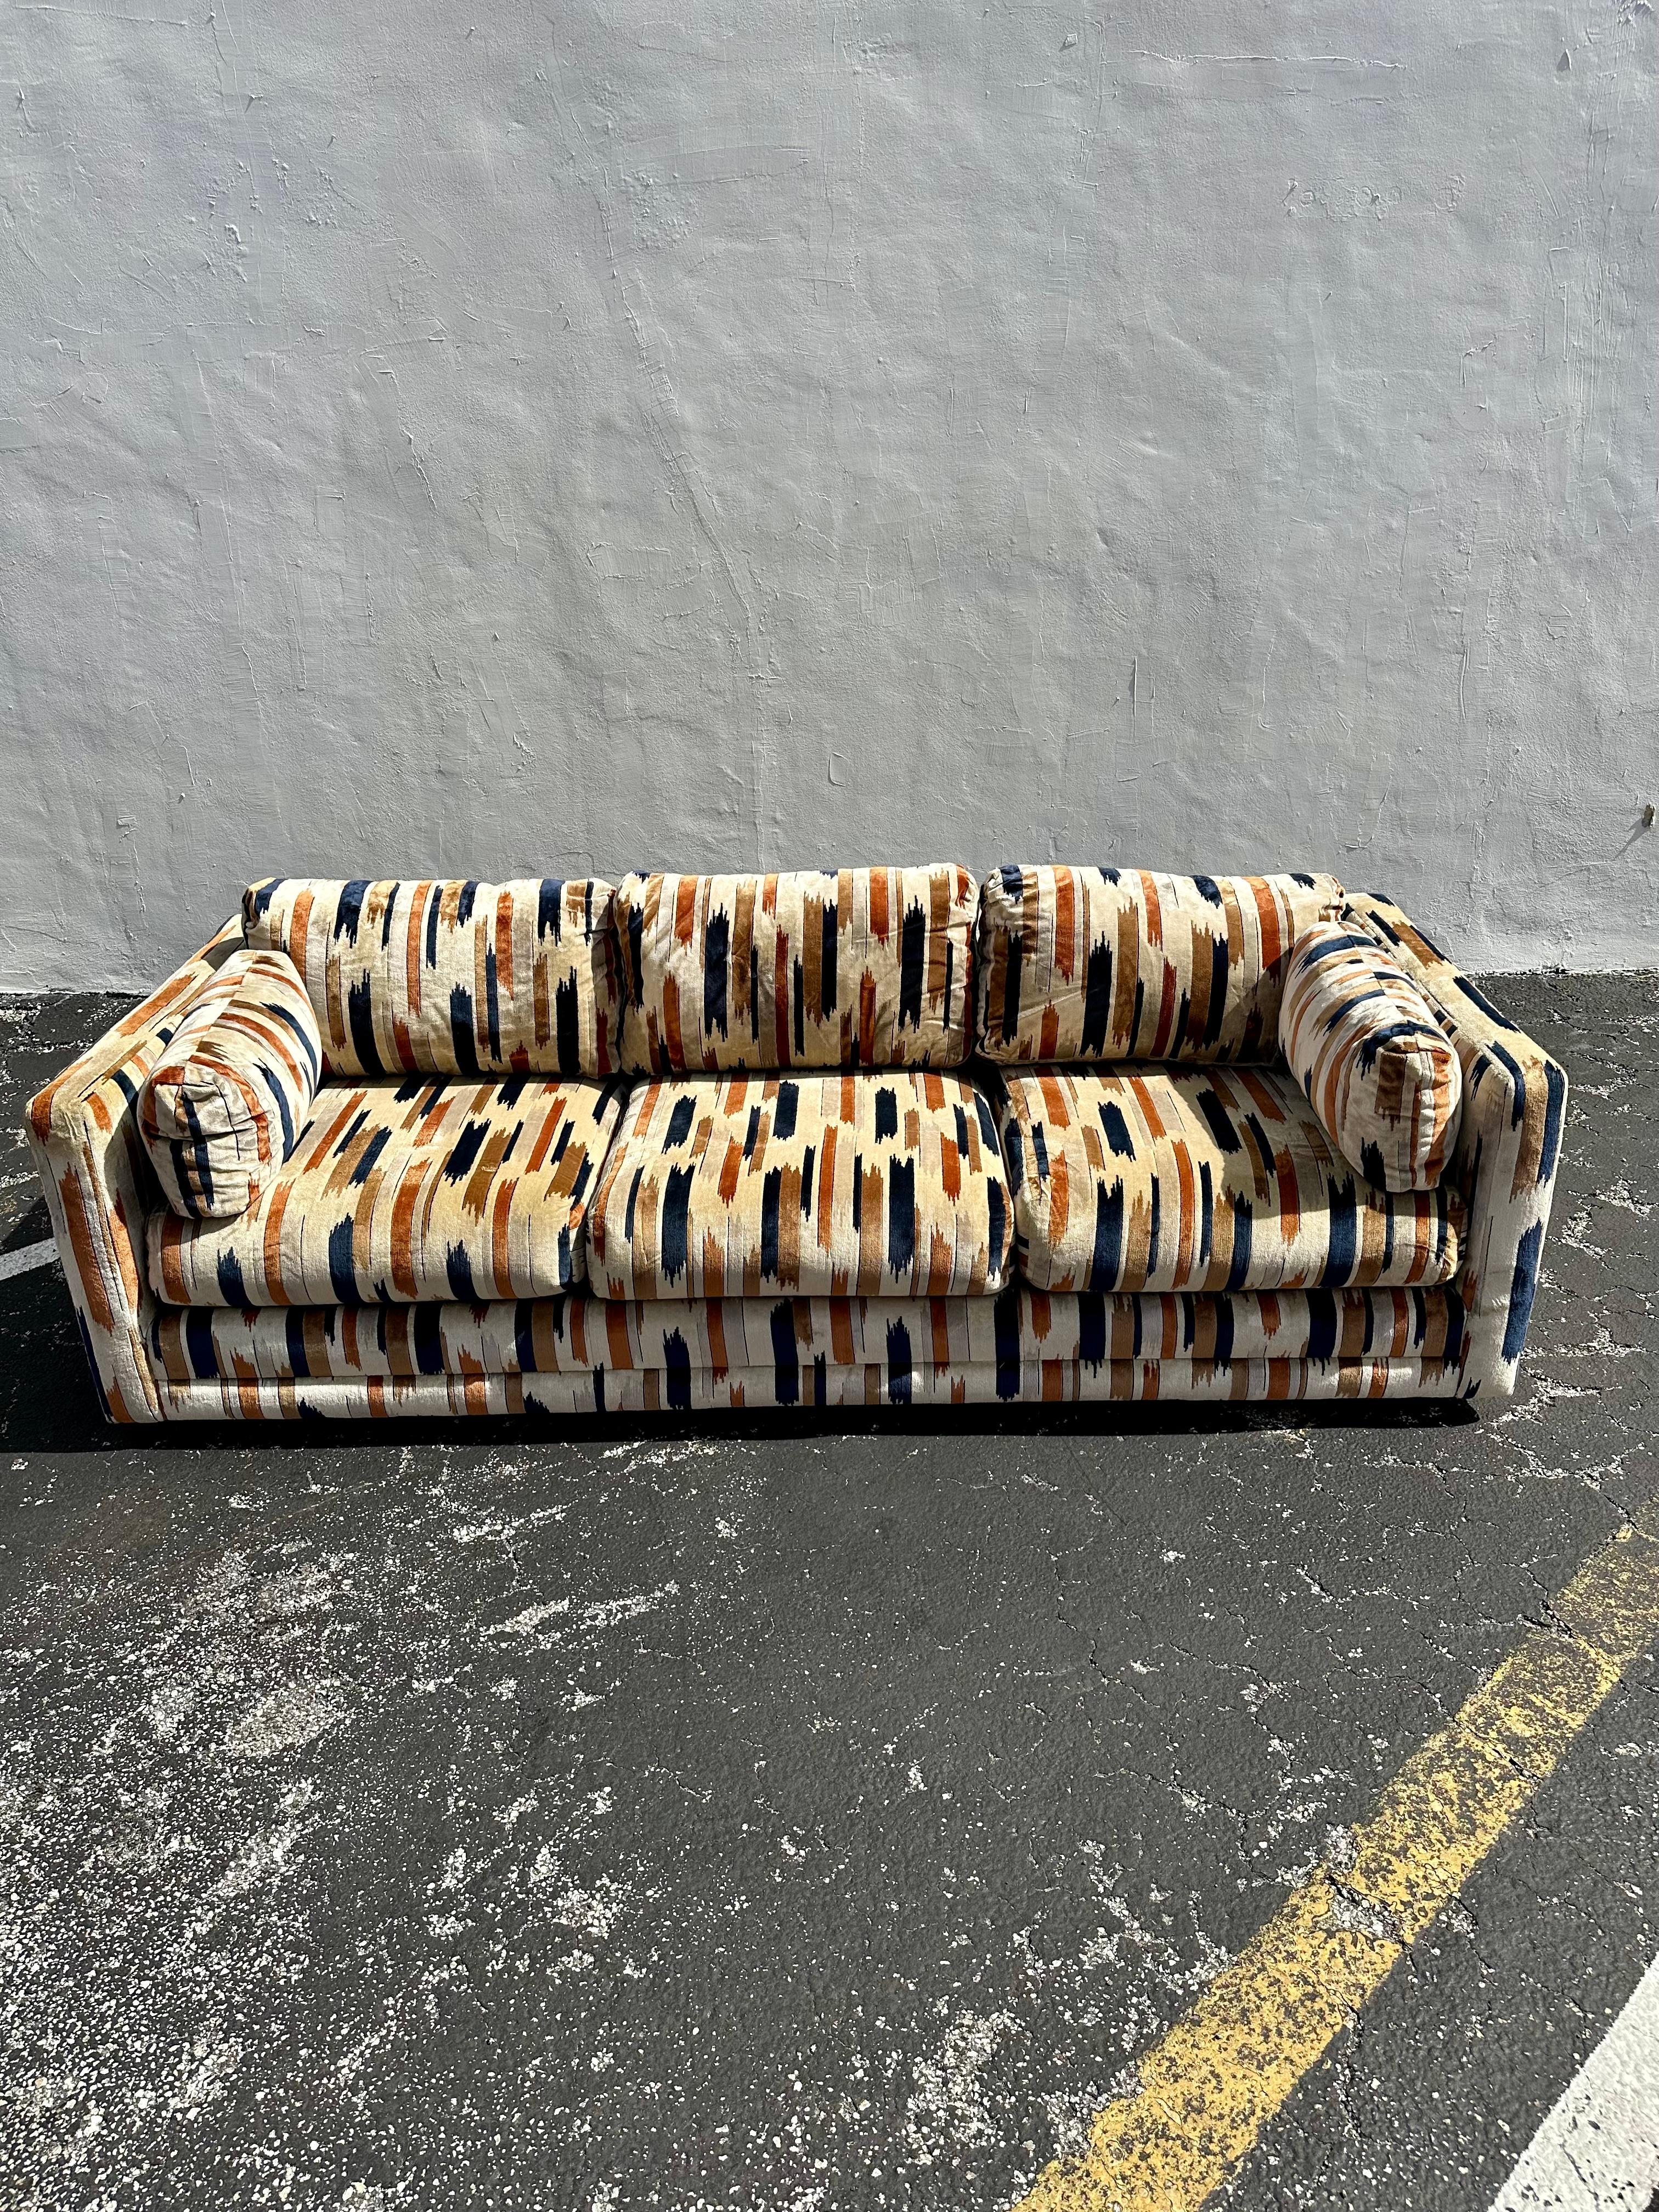 On offer on this occasion is one of the most desirable Baughman/Larsen, cotton velvet, tuexedo sofa you could hope to find. In colorations of navy blue, brown and beige. This is an ultra-rare opportunity to acquire what is the most spectacular and